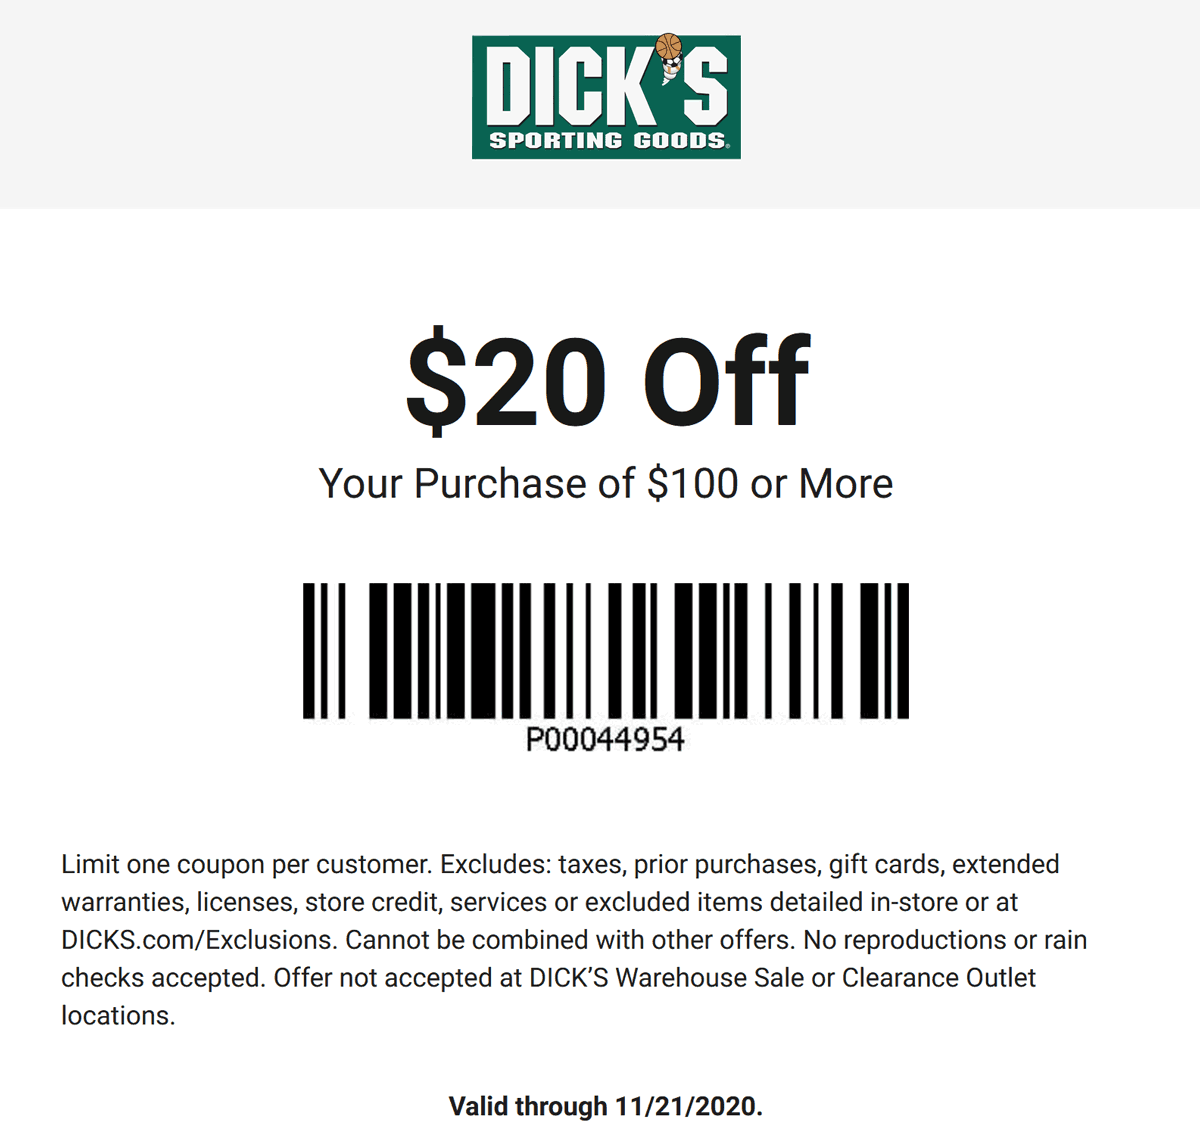 Dicks stores Coupon  $20 off $100 at Dicks sporting goods, ditto online #dicks 